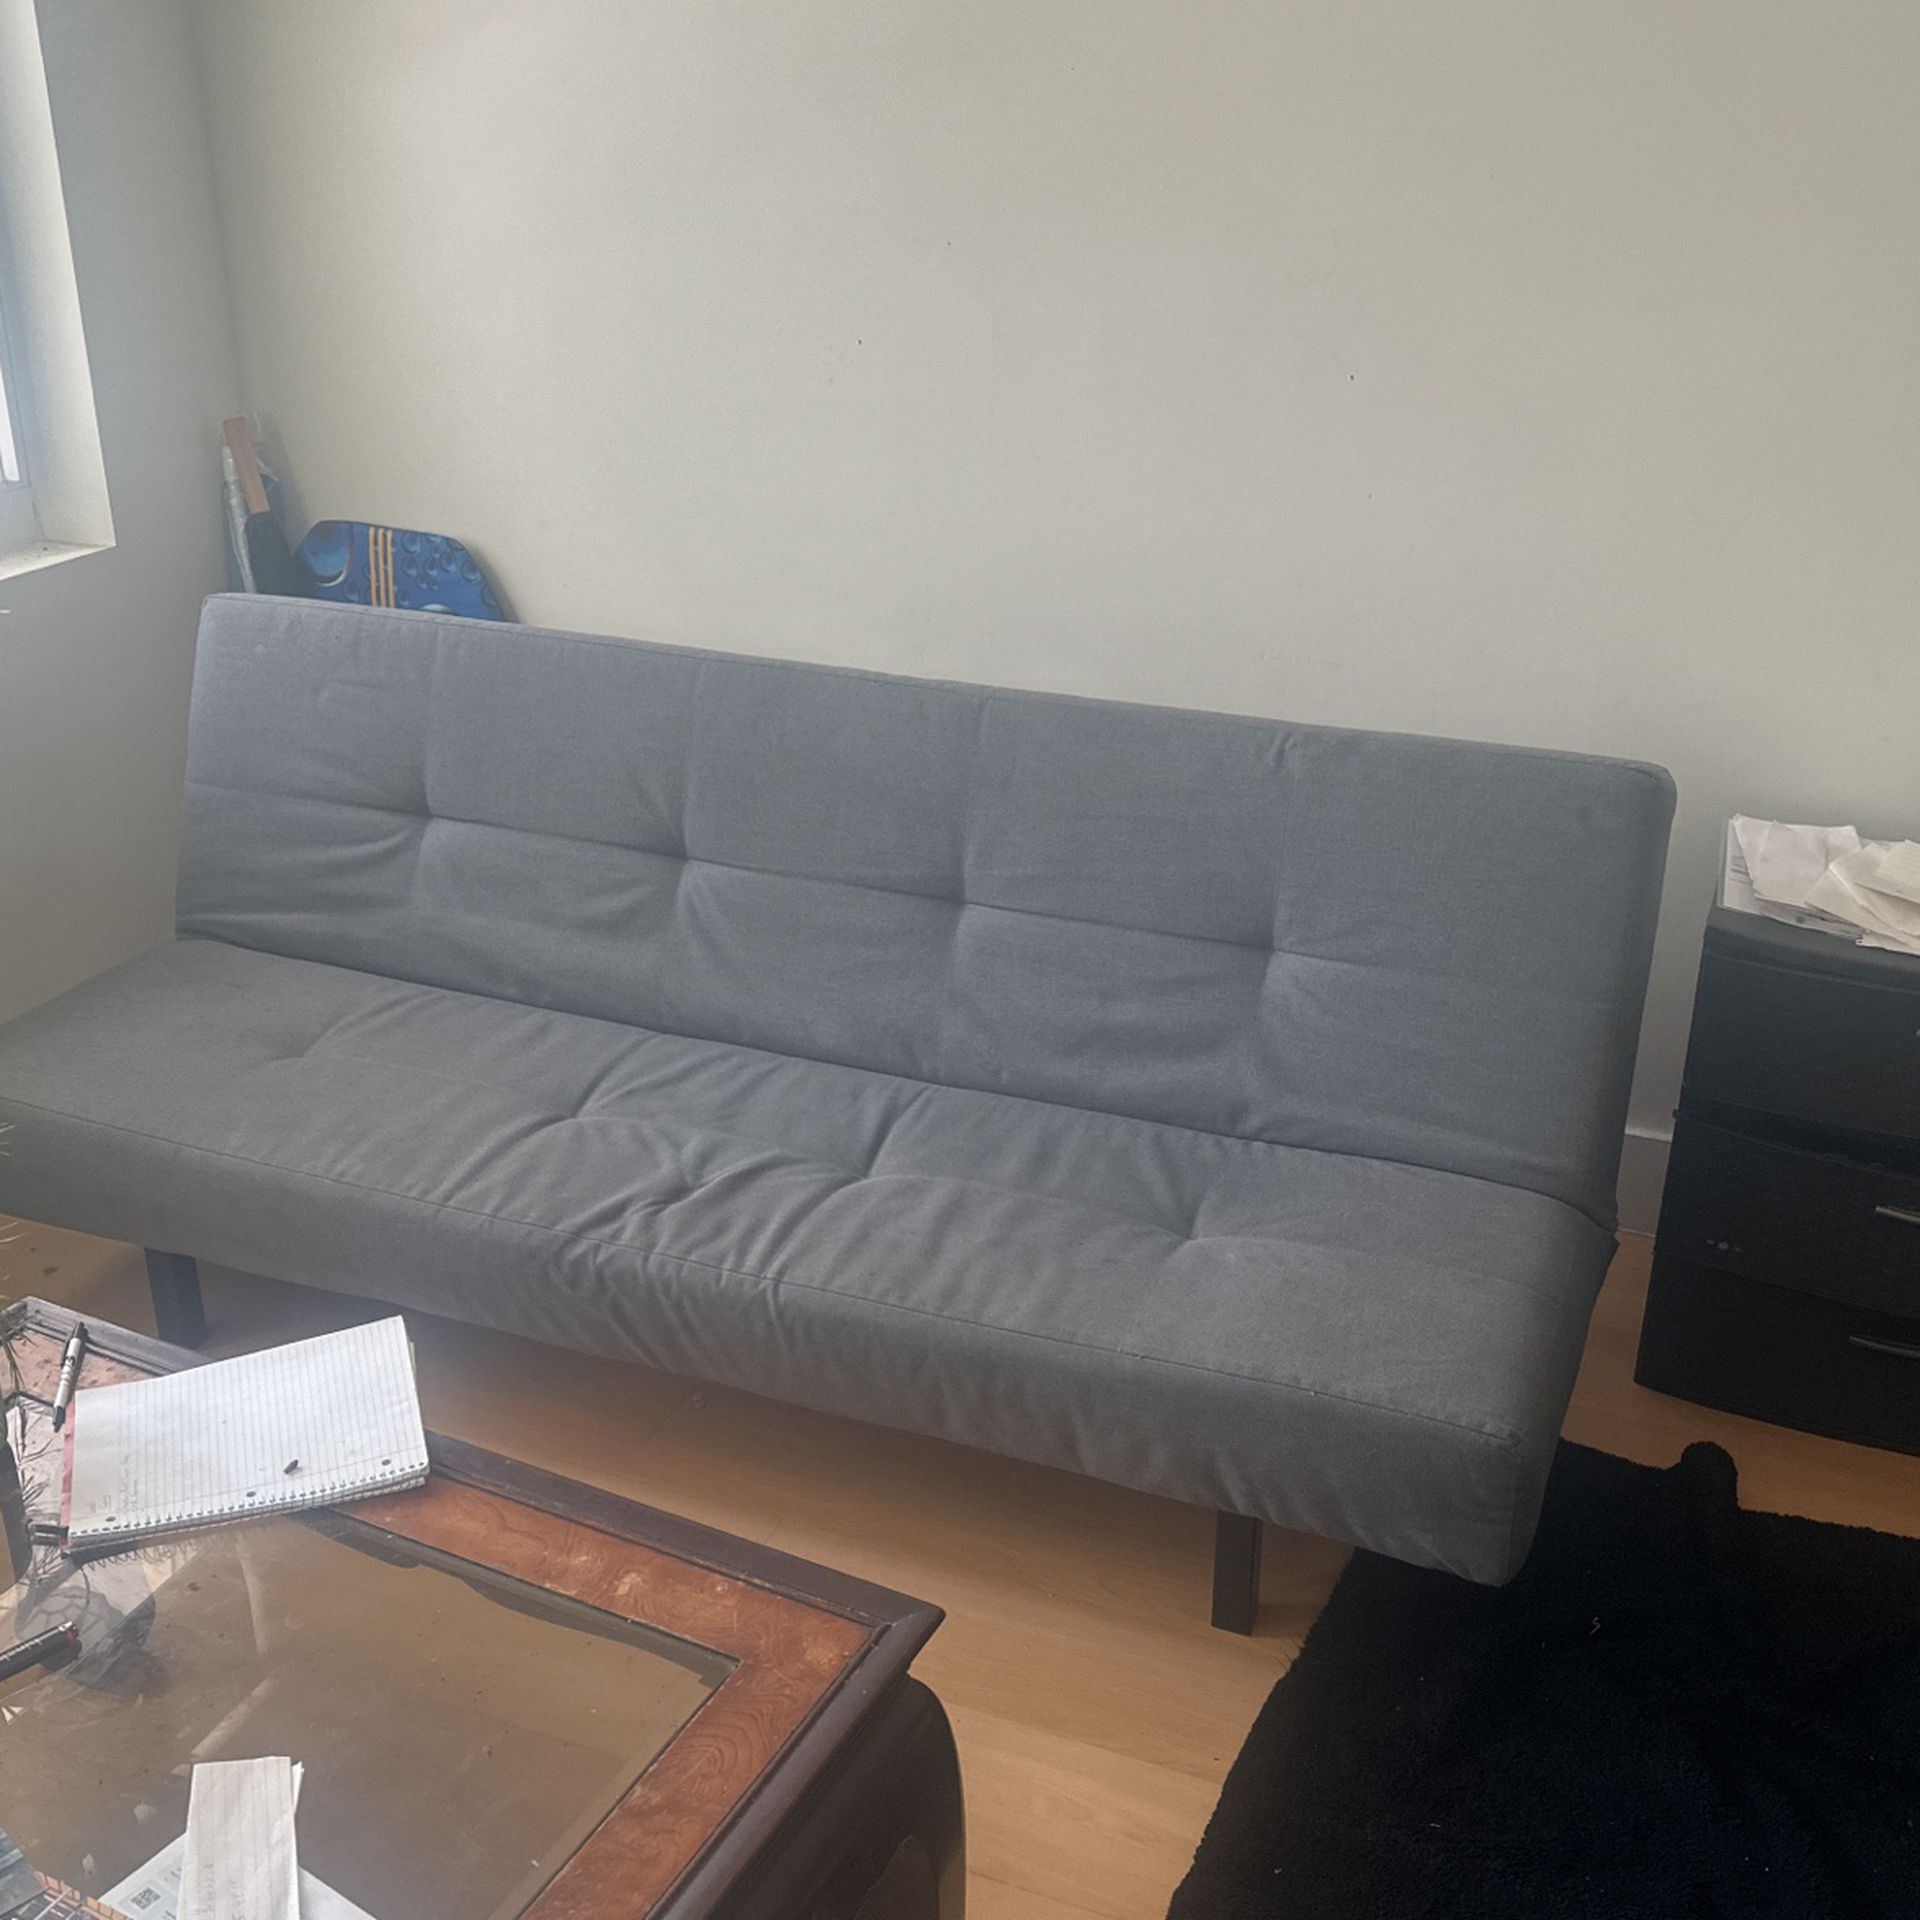 GRAY FUTON/COUCH/BED